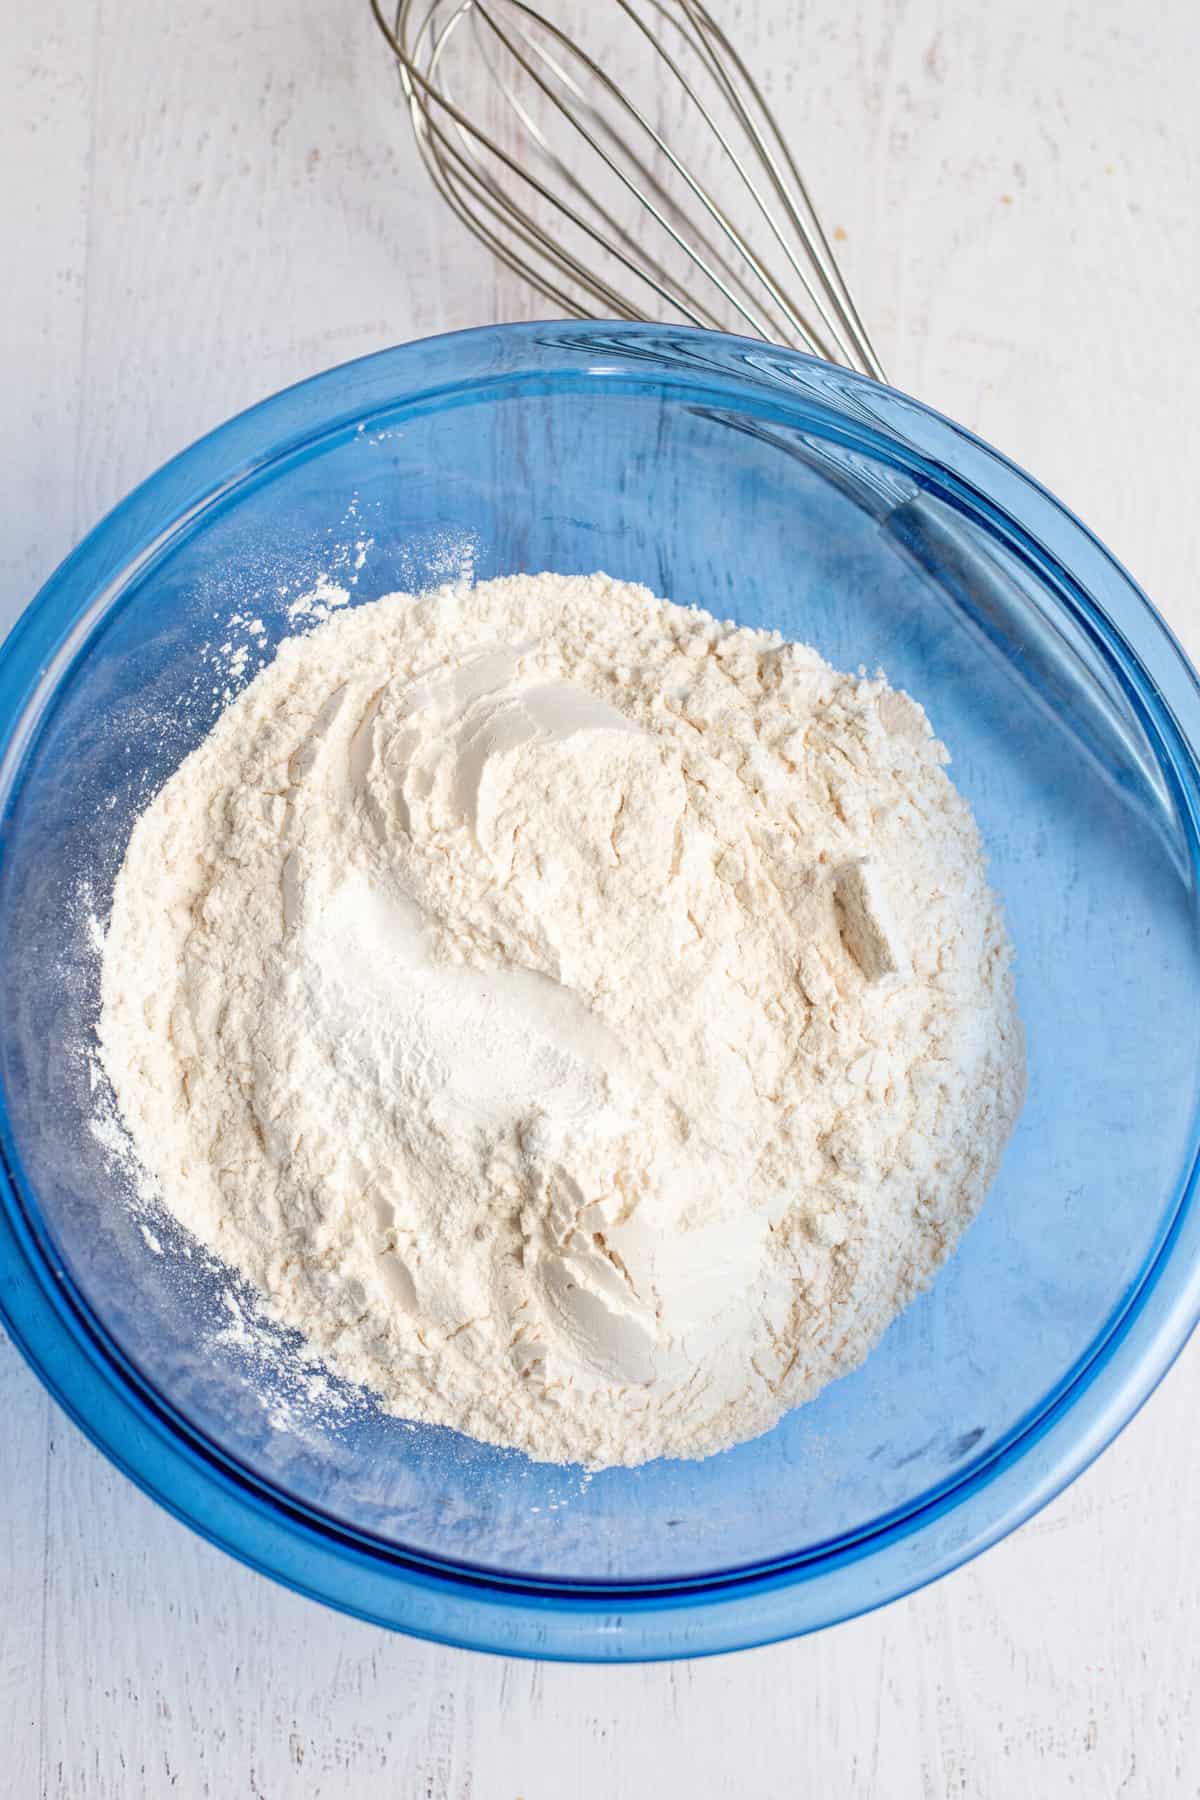 mix dry ingredients in another mixing bowl